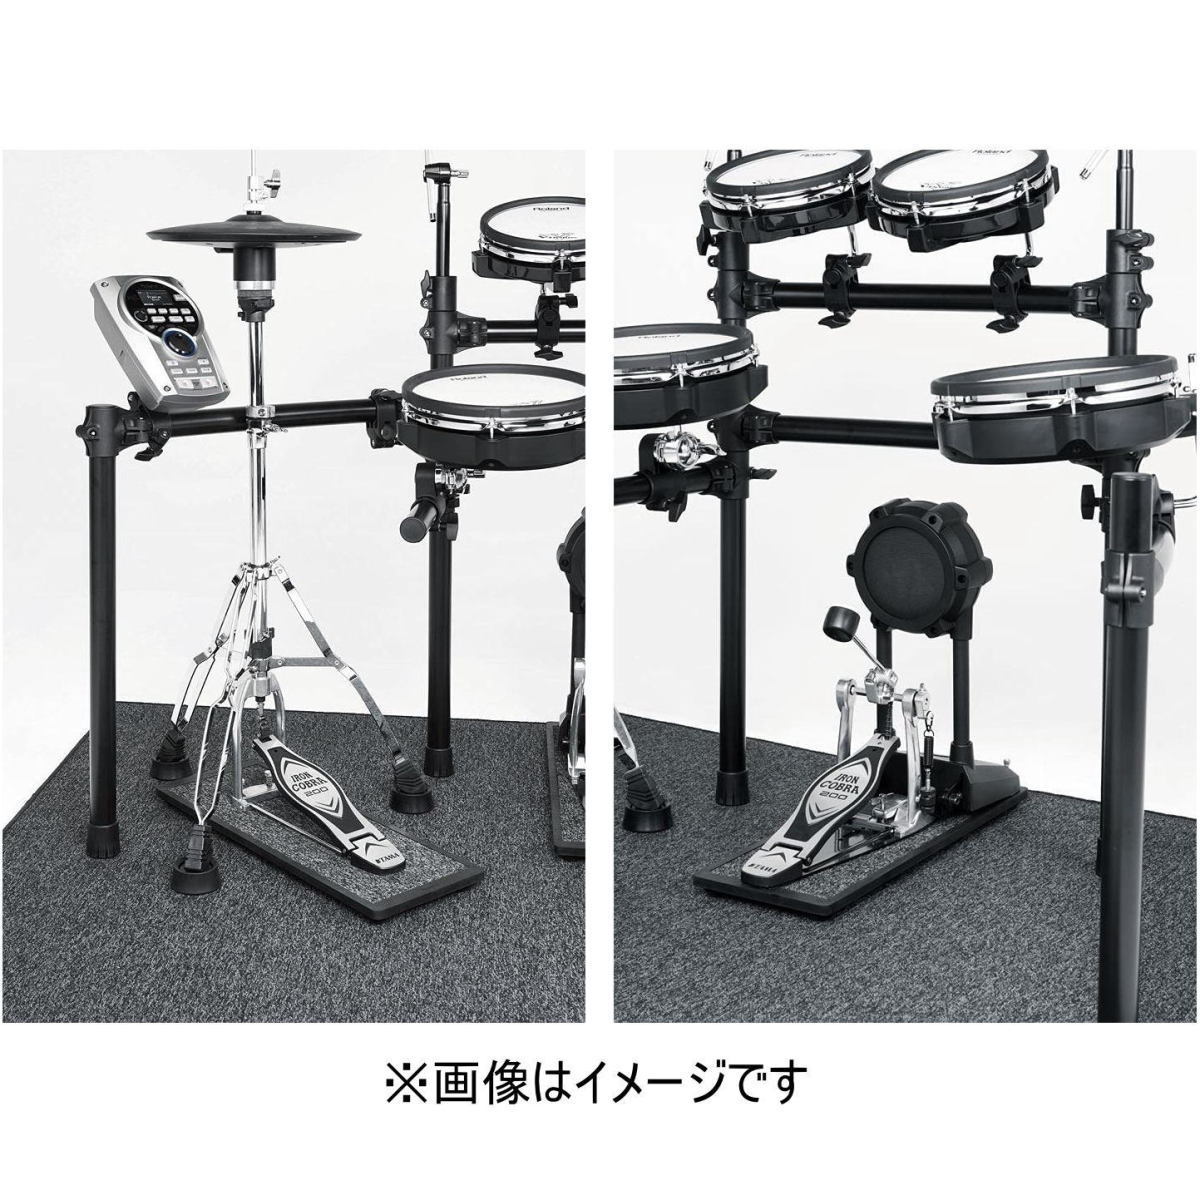 [ most short next day delivery ]Roland Roland noise i-ta-NE-1 V-Drum for vibration control item stand for 3 piece set 